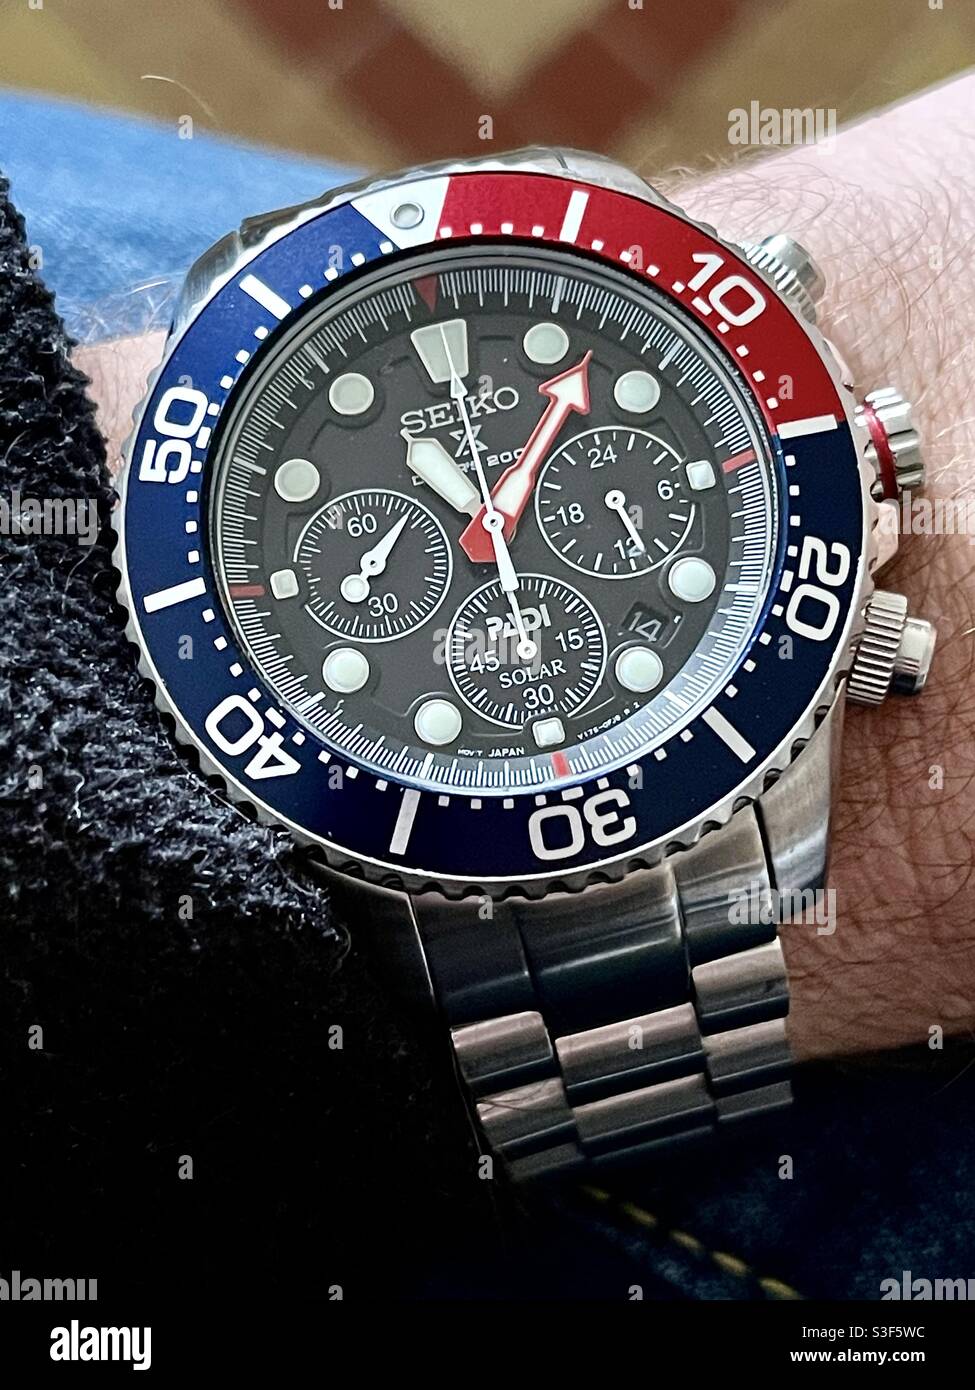 Seiko Prospex PADI Pepsi Solar Diver Chronograph wrist watch with blue and  red bezel, black wave dial and lumed hour markers and hands on a Jubilee  bracelet band Stock Photo - Alamy